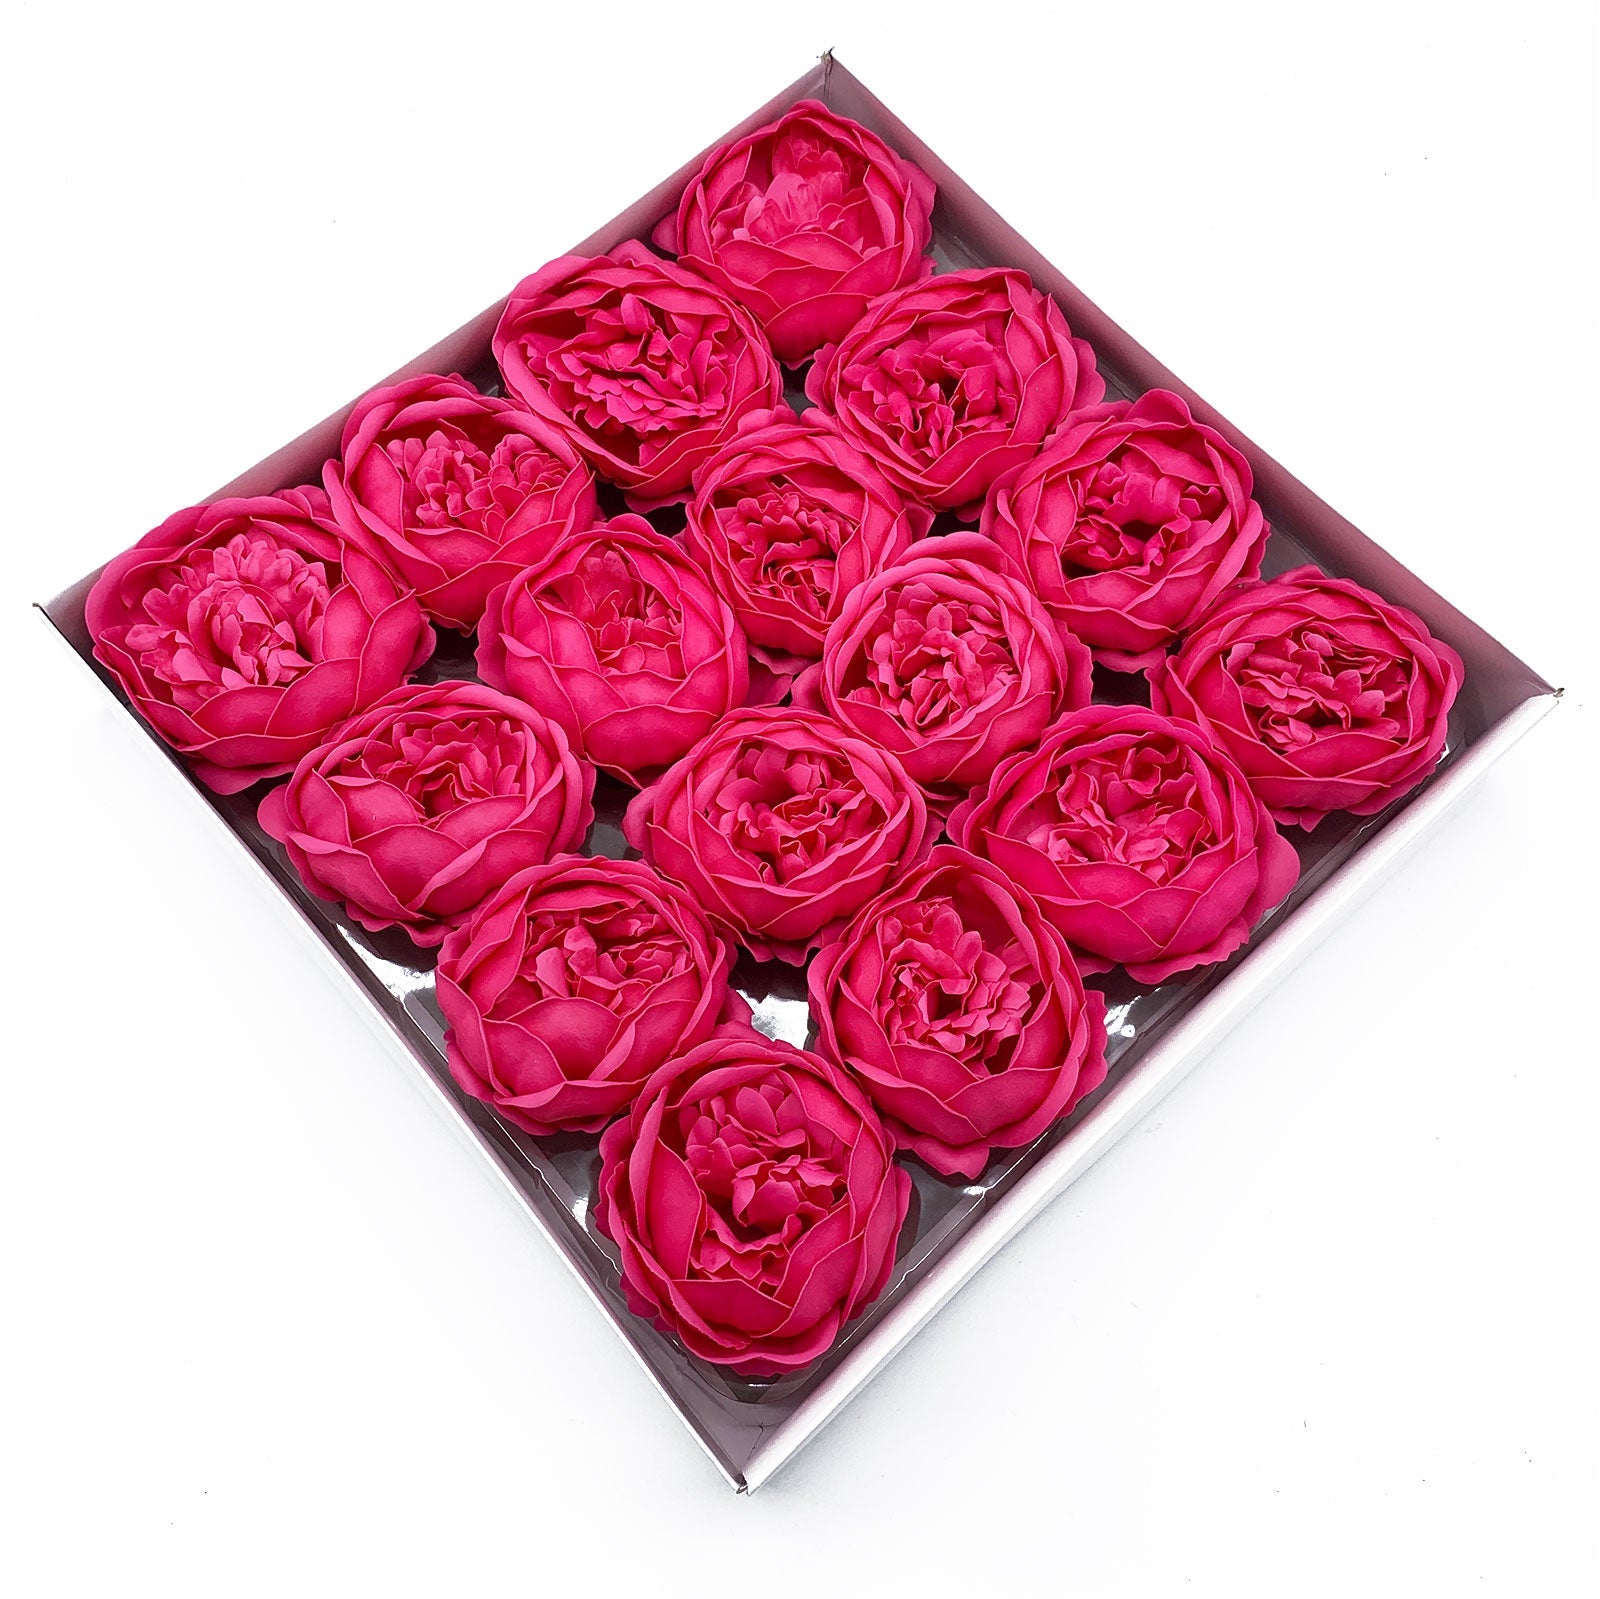 Craft Soap Flower - Ext Large Peony - Rose - £38.0 - 